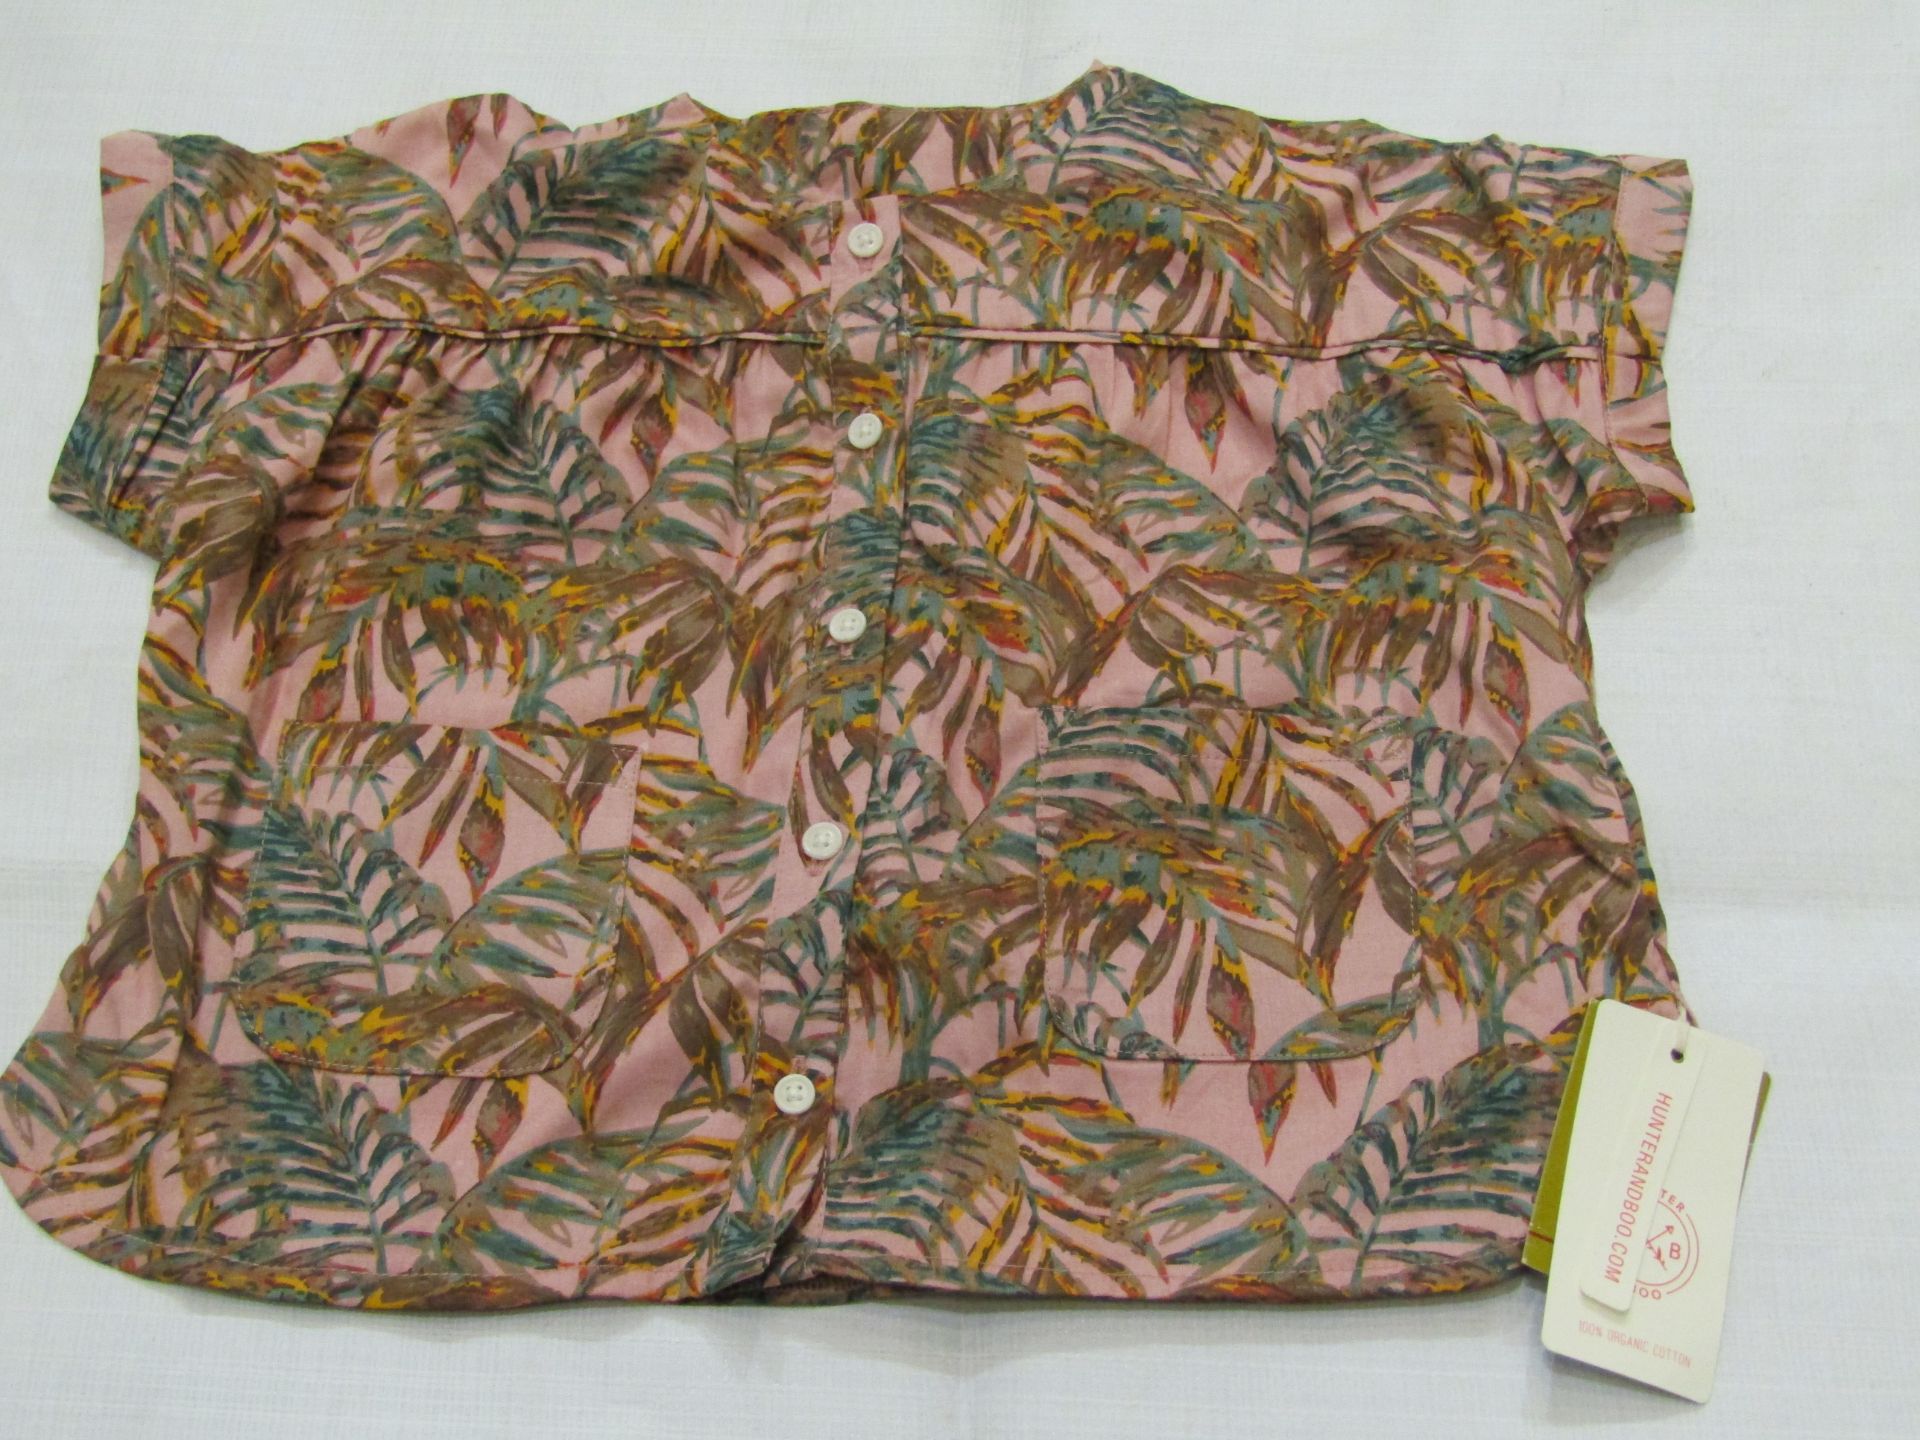 2 X Hunter & Boo Nude Palawan Blouses Aged 4-5 yrs New & Packaged RRP £21 Each - Image 2 of 2